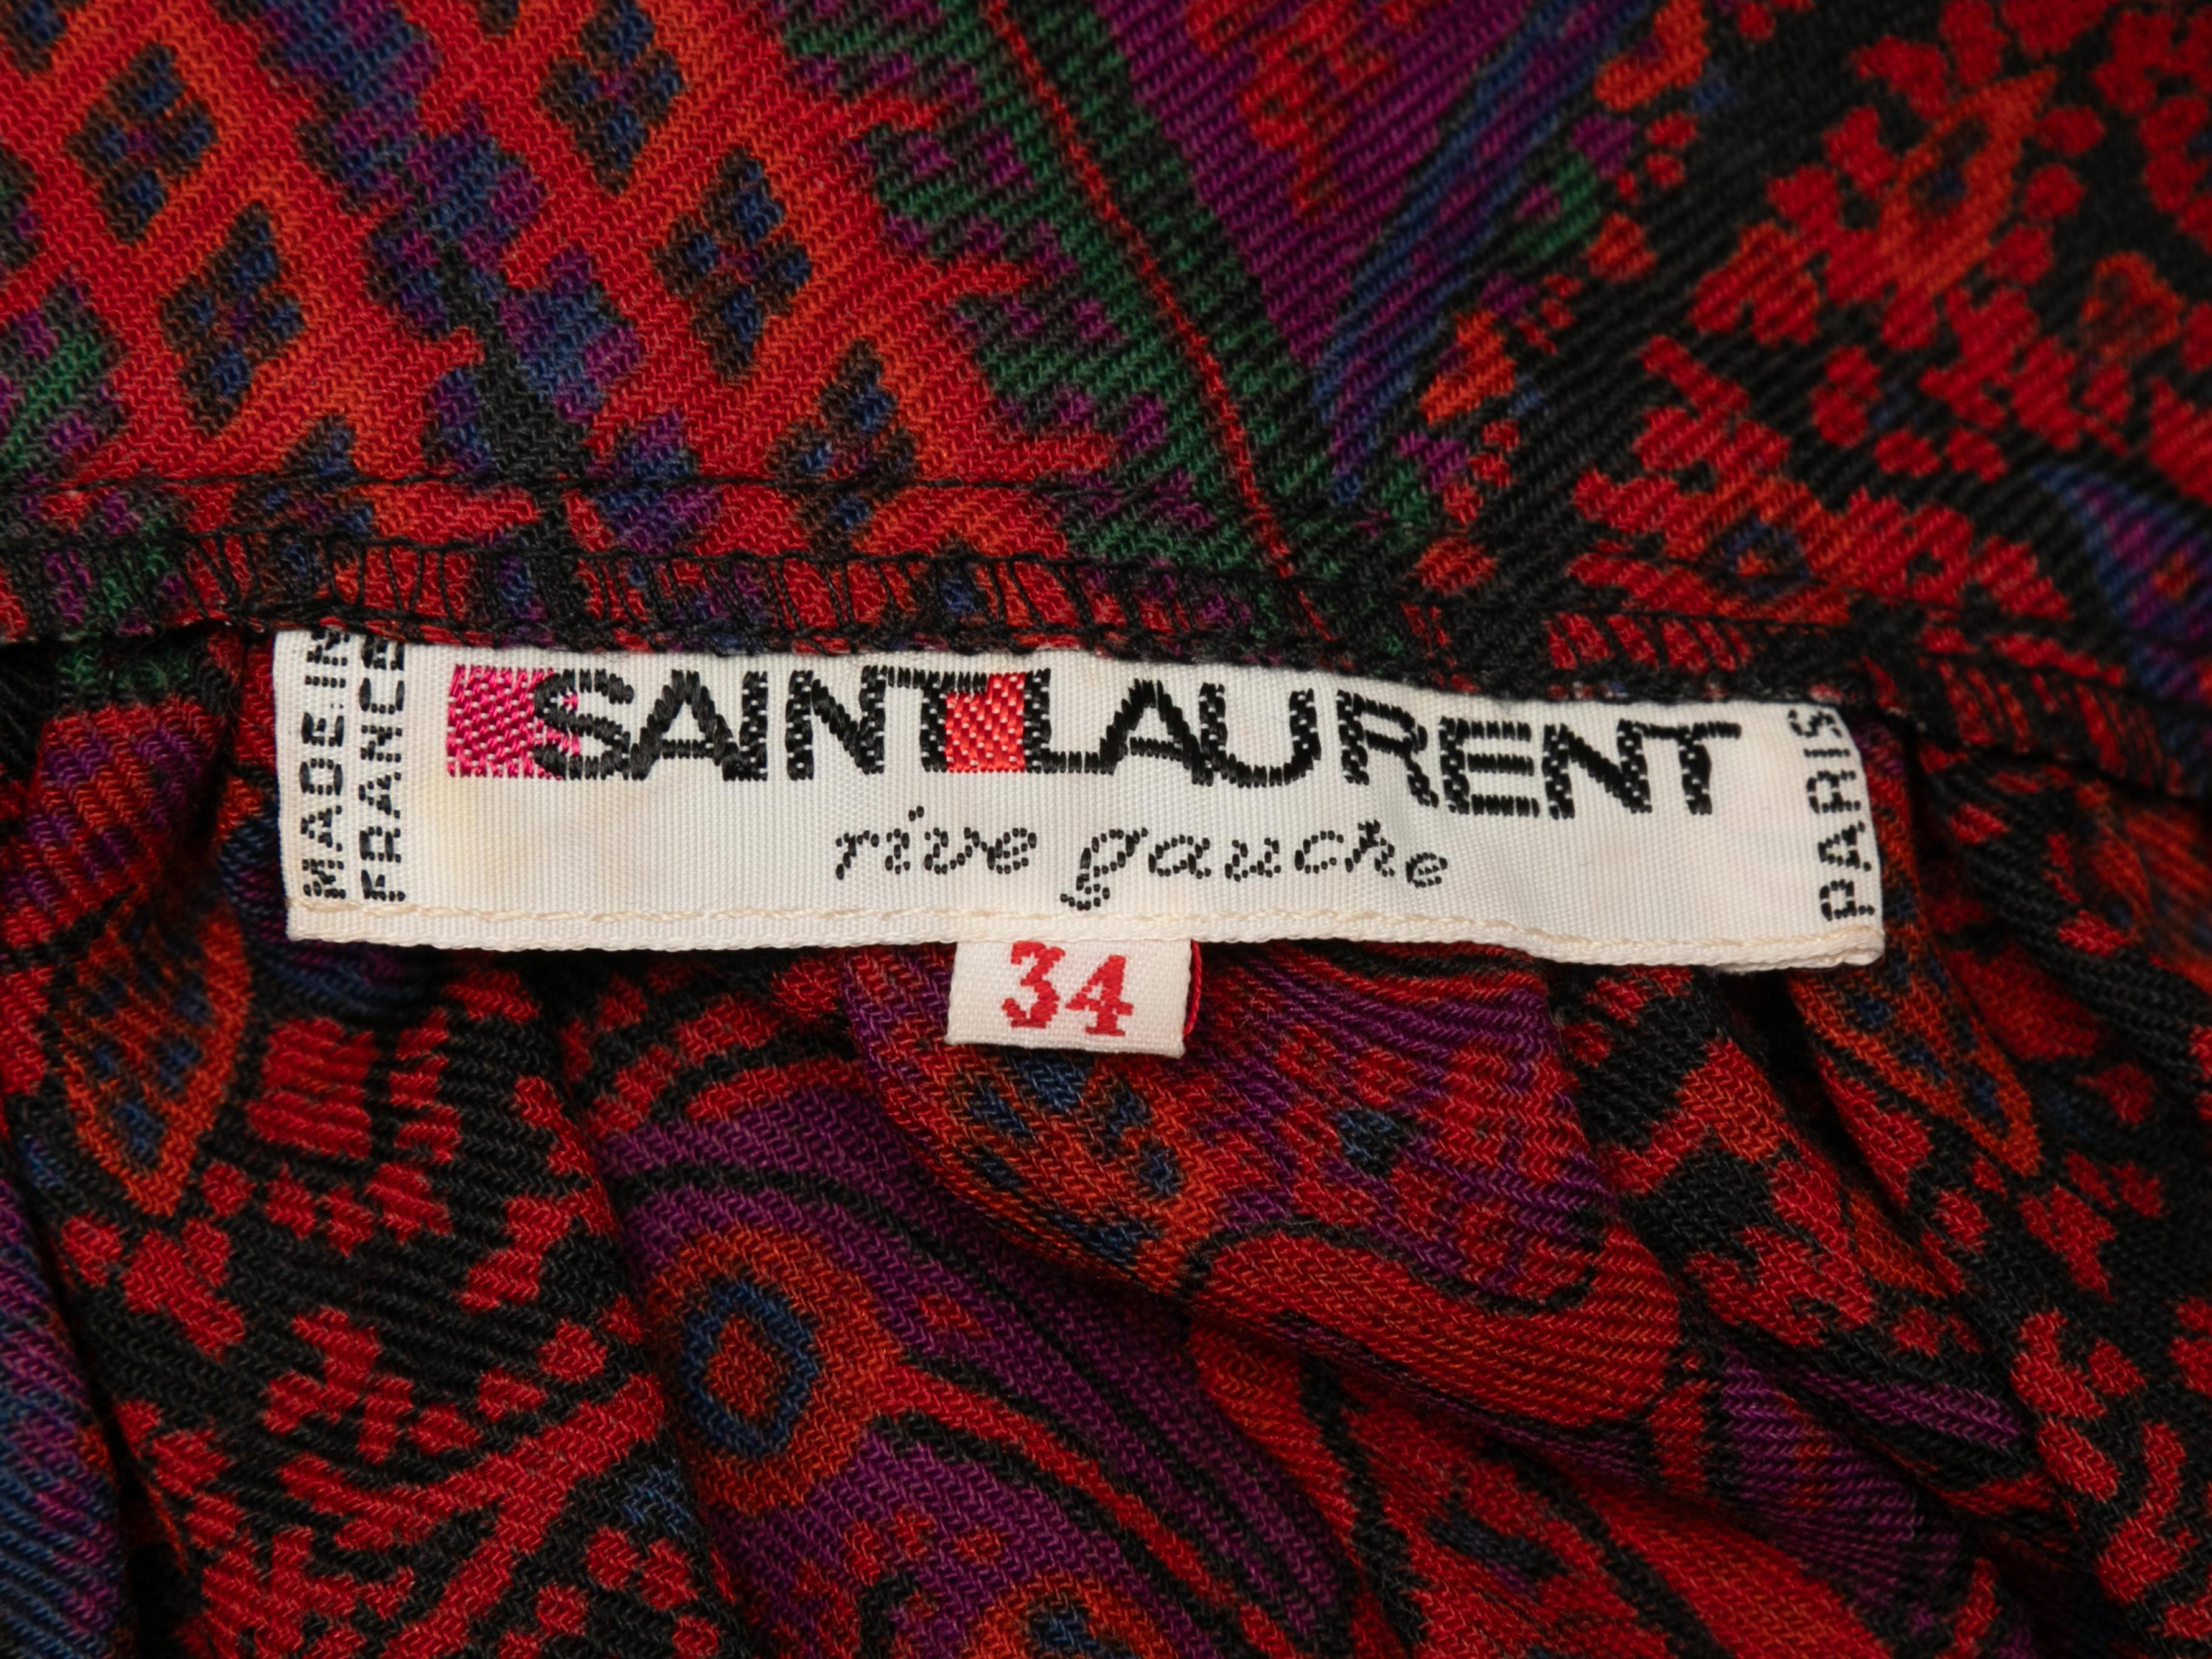 Vintage red and multicolor paisley print maxi skirt by Saint Laurent. From the 1976 Russian Collection. Side closure. 24